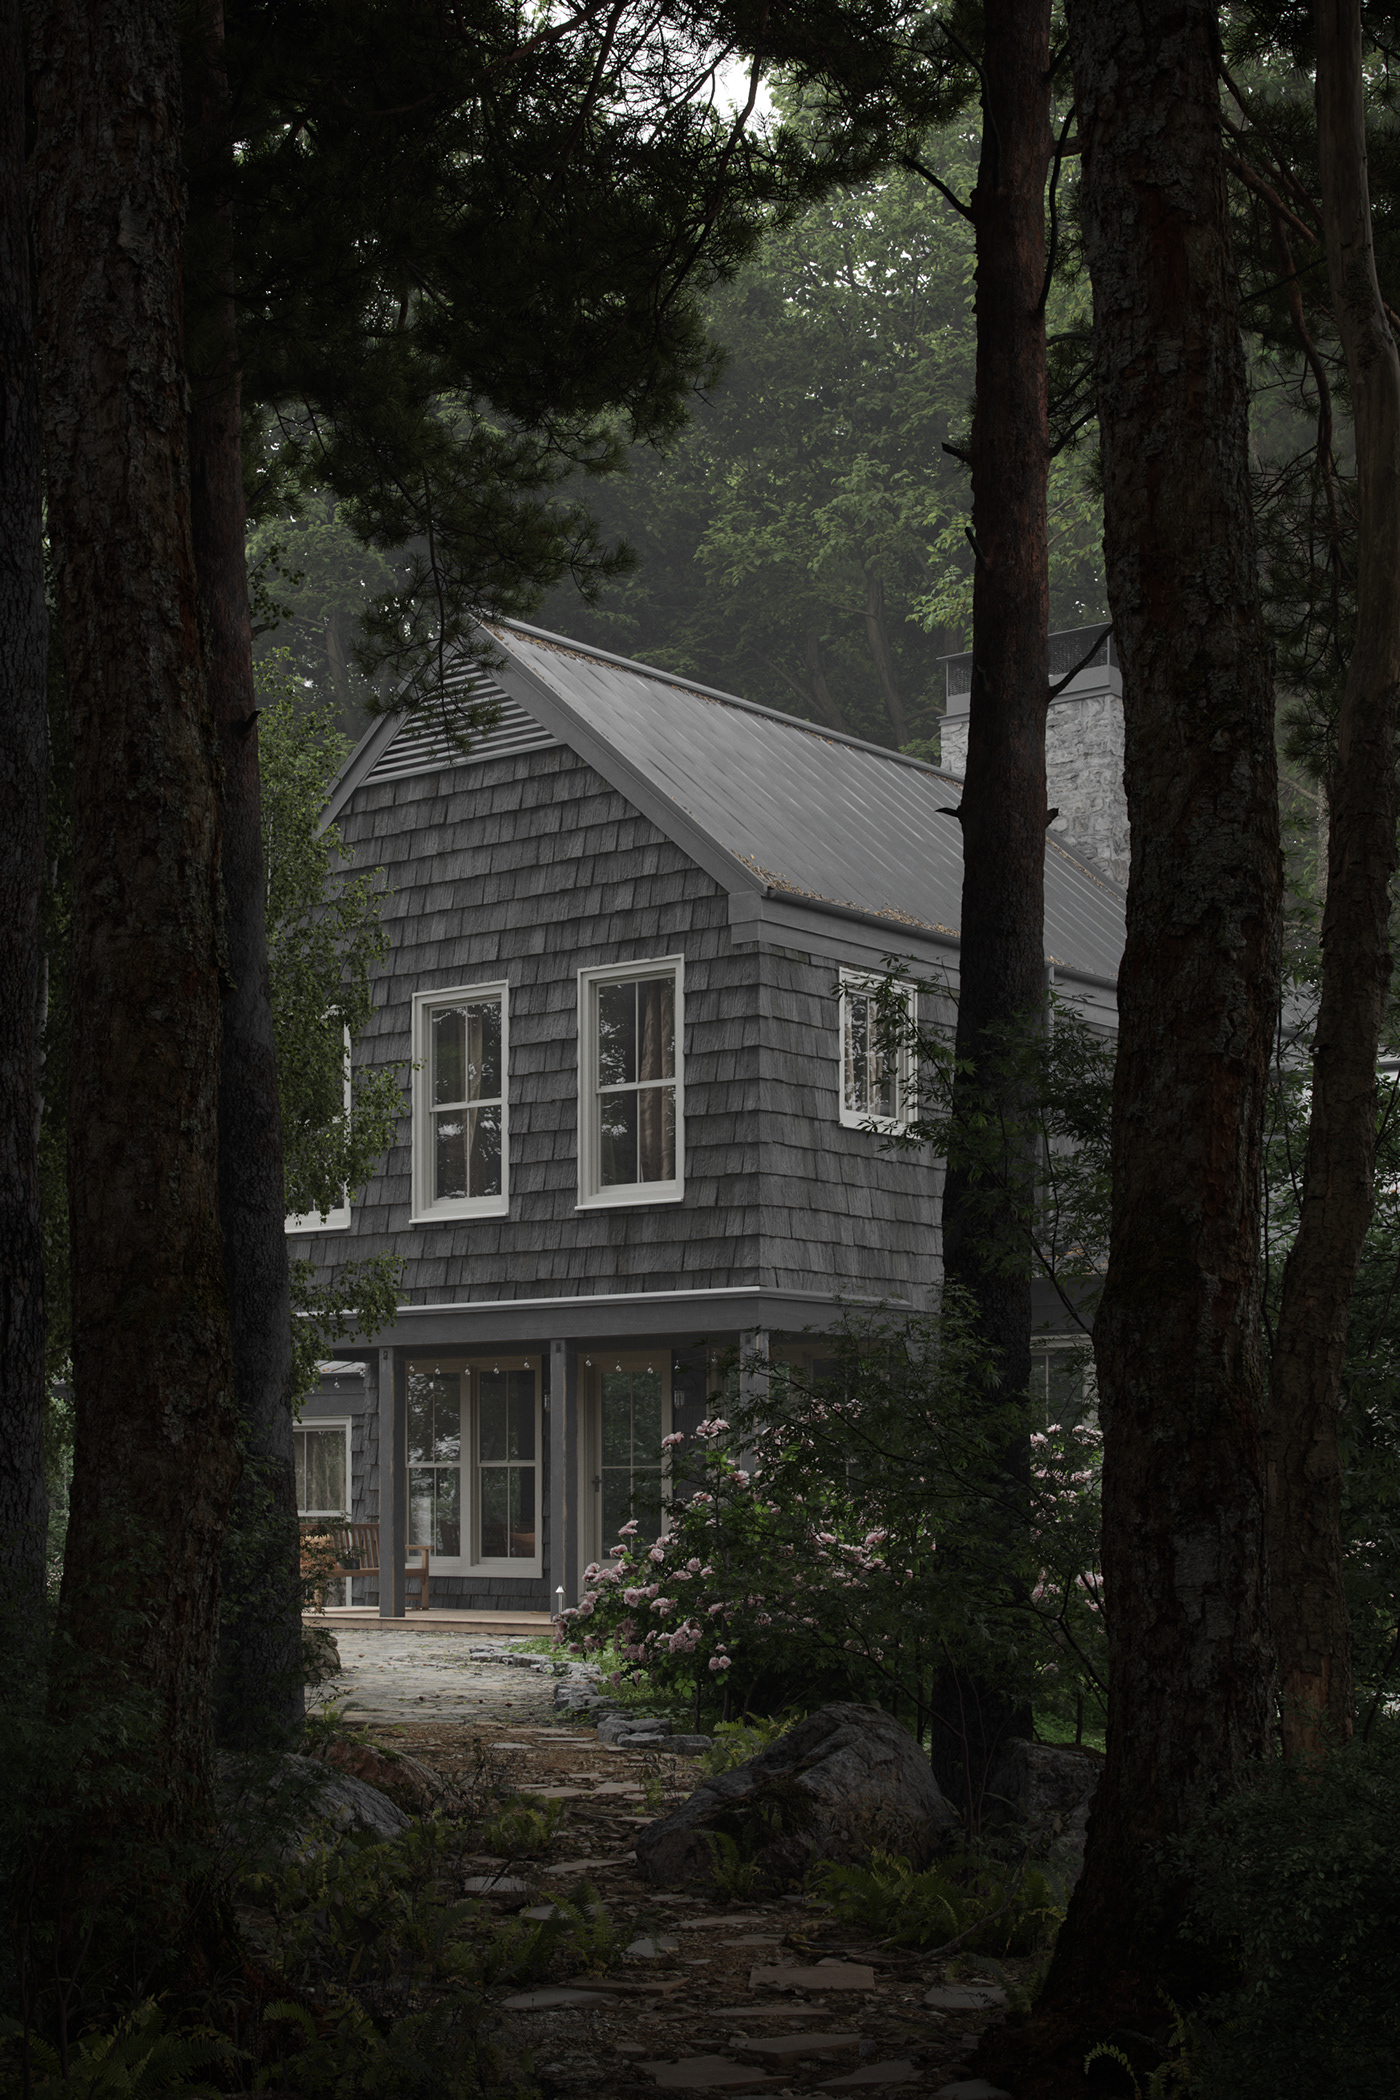 architecture Cottage forest forest house garden greenery house Landscape Quixel yard